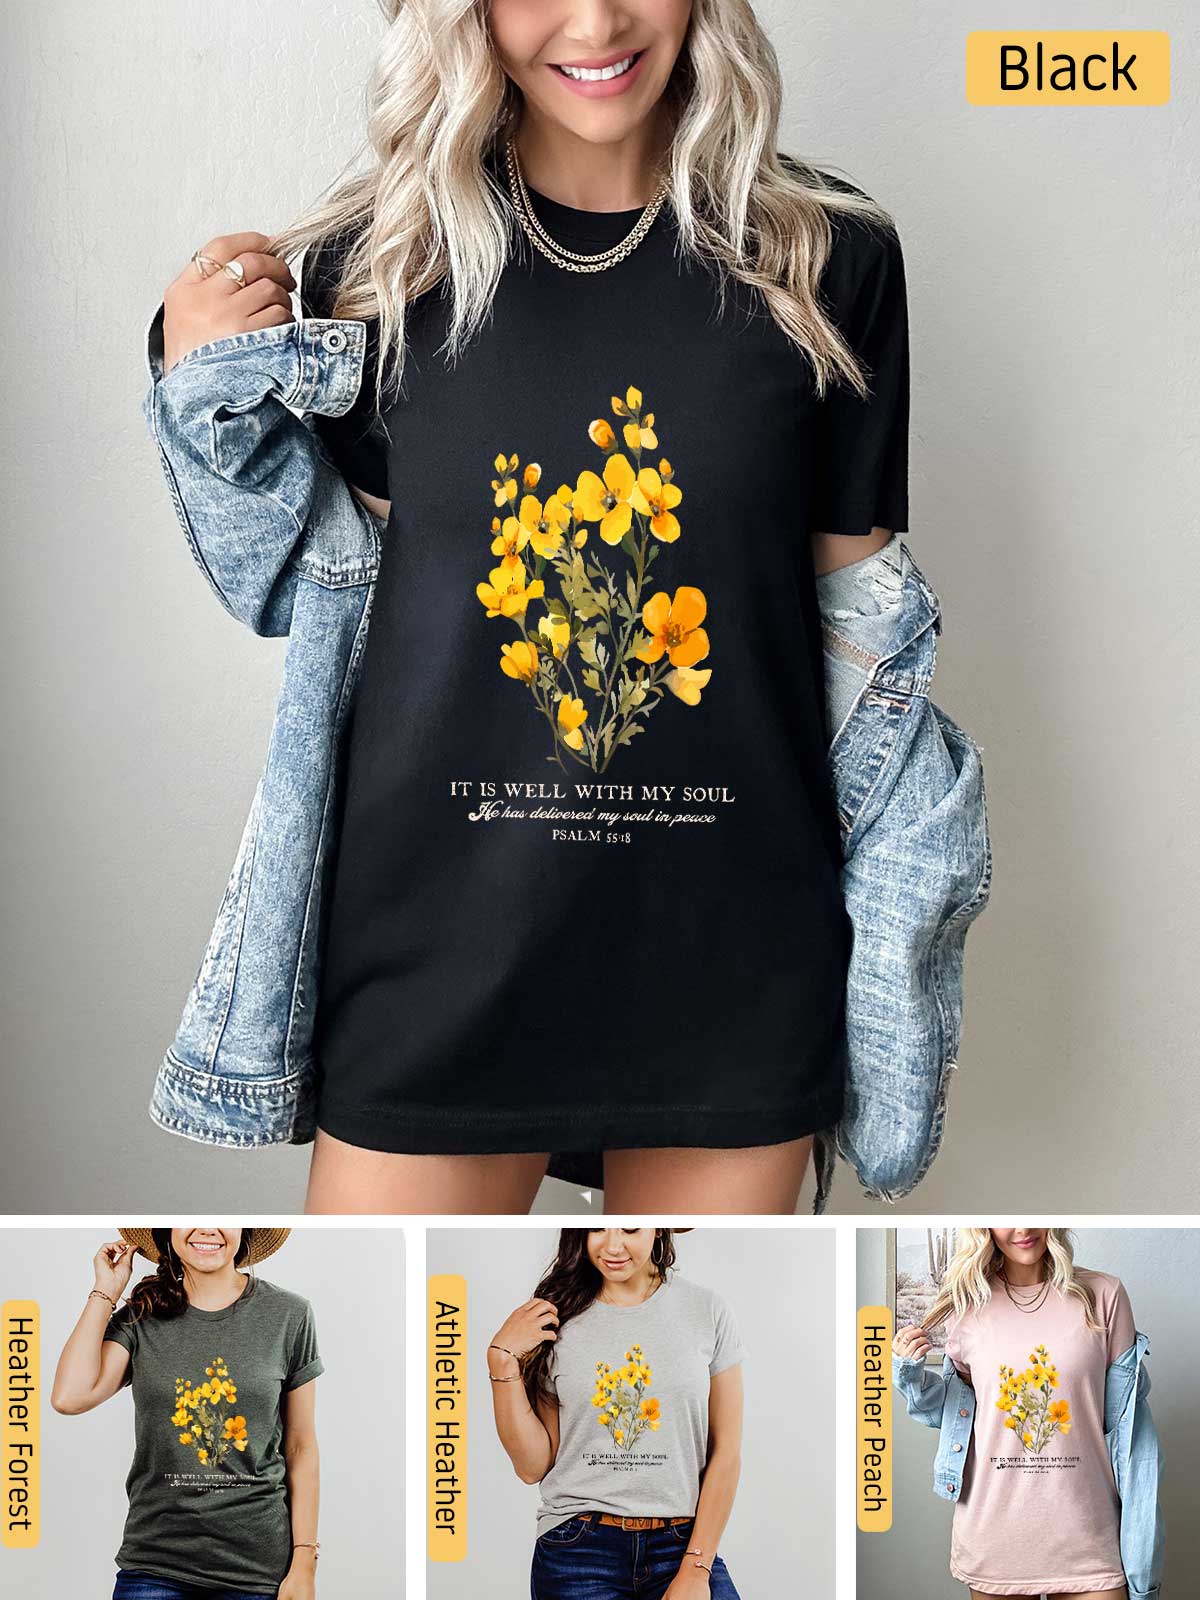 a woman wearing a black shirt with yellow flowers on it